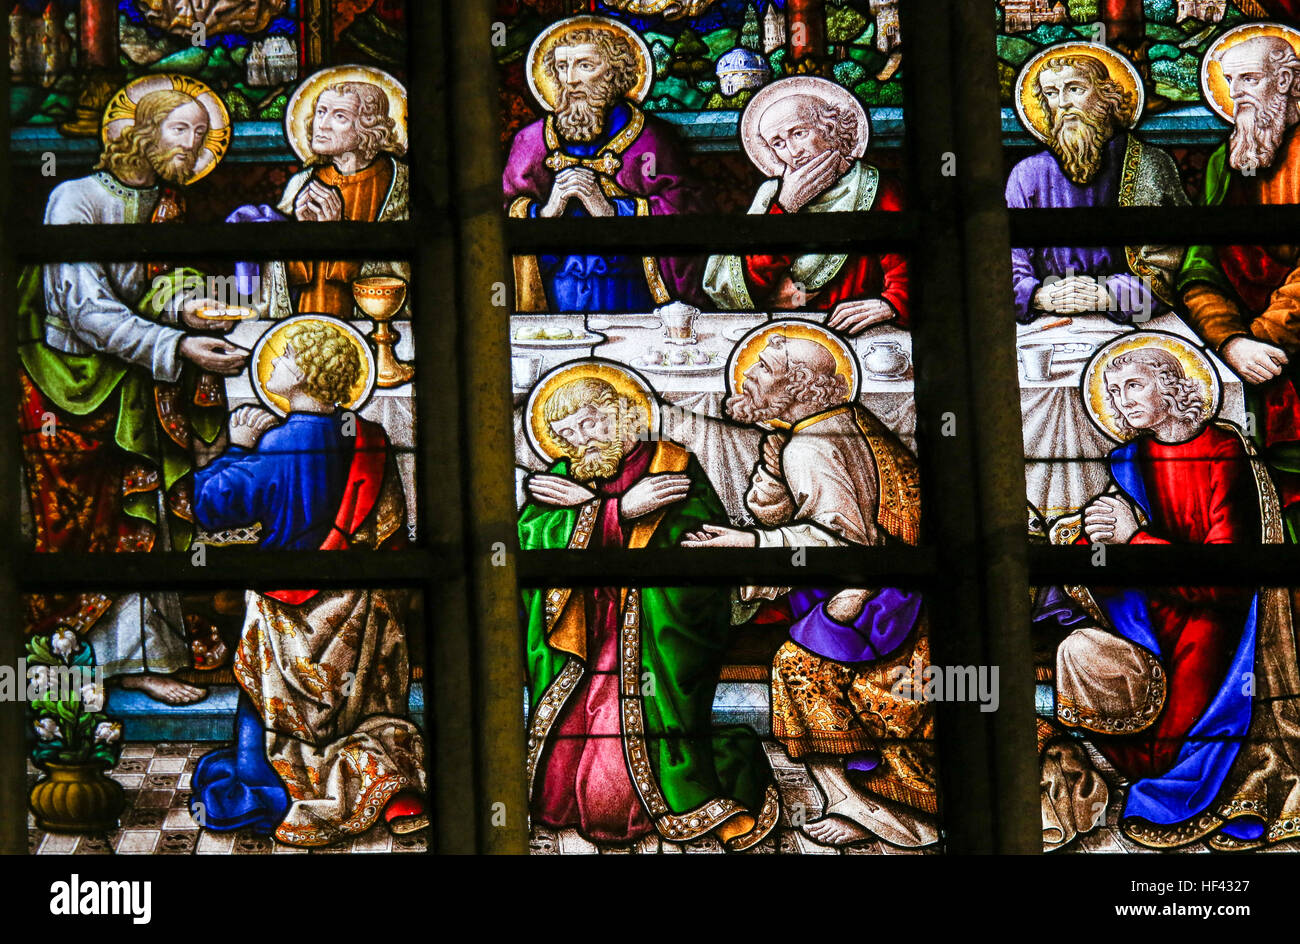 Stained Glass window depicting the Last Supper on Maundy Thursday, in the Cathedral of Saint Bavo in Ghent, Flanders, Belgium. Stock Photo